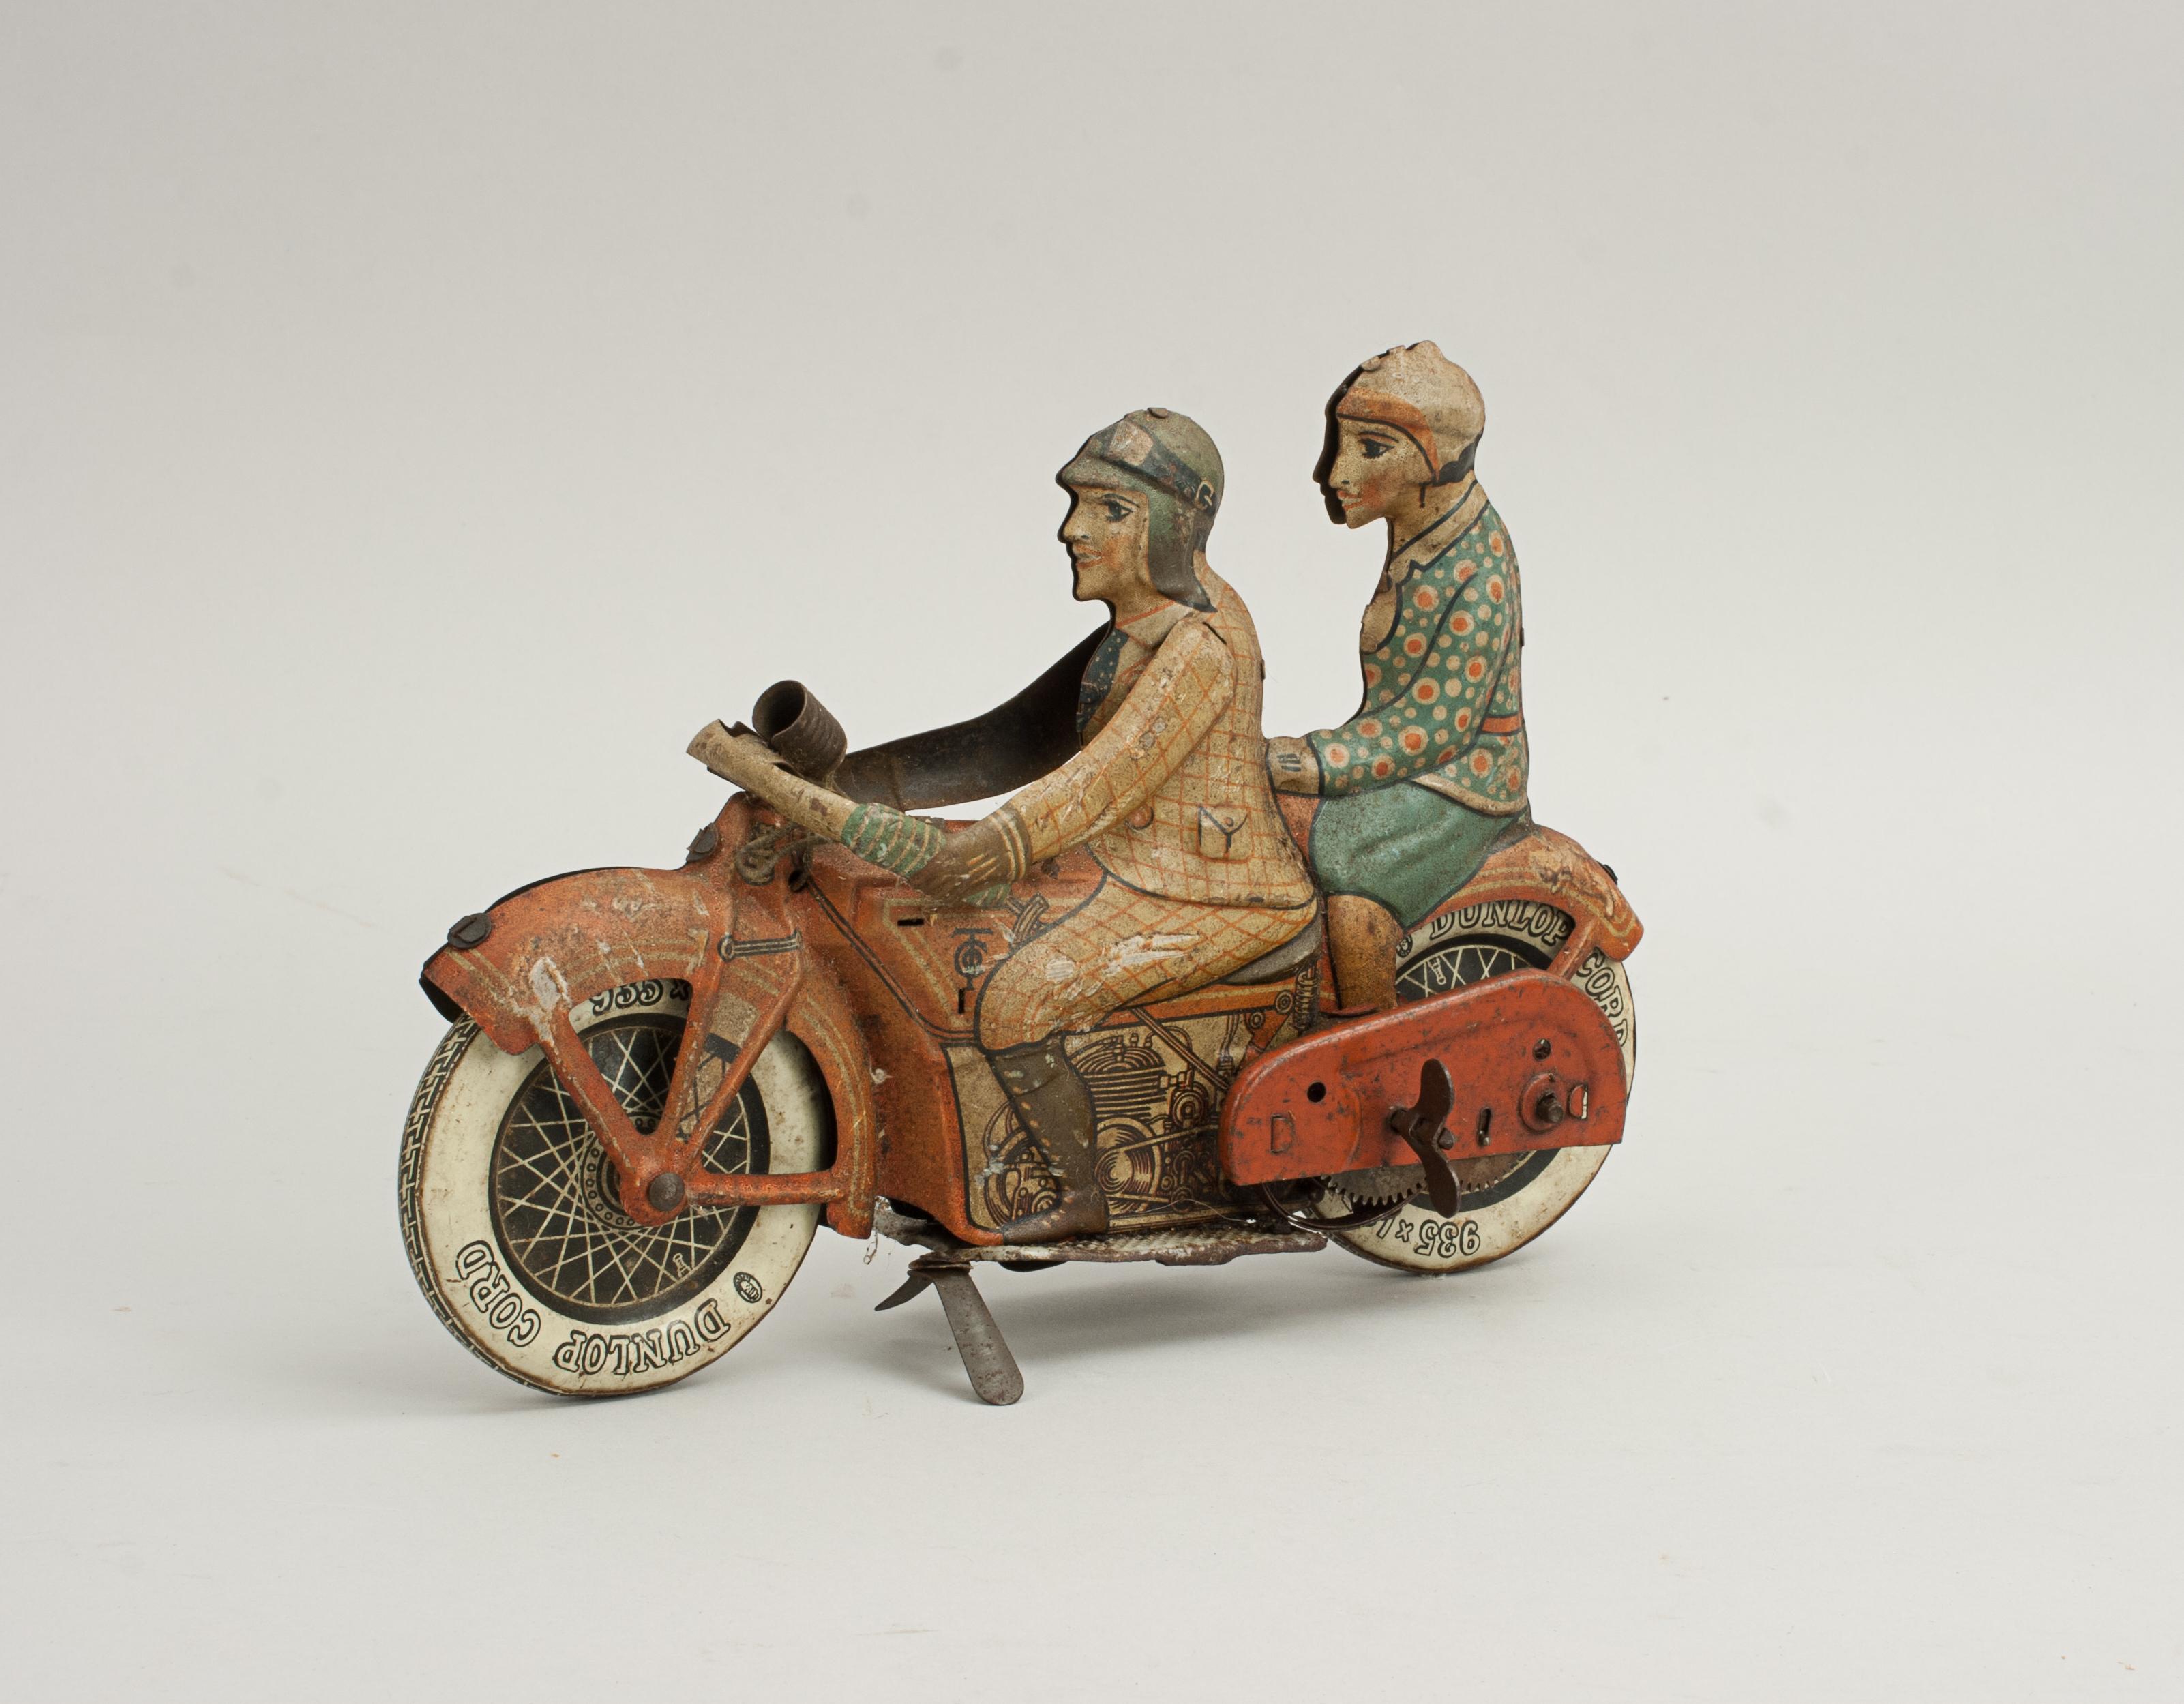 Tipp & Co Clockwork Motorcycle With Rider & Pillion Passenger For Sale 4